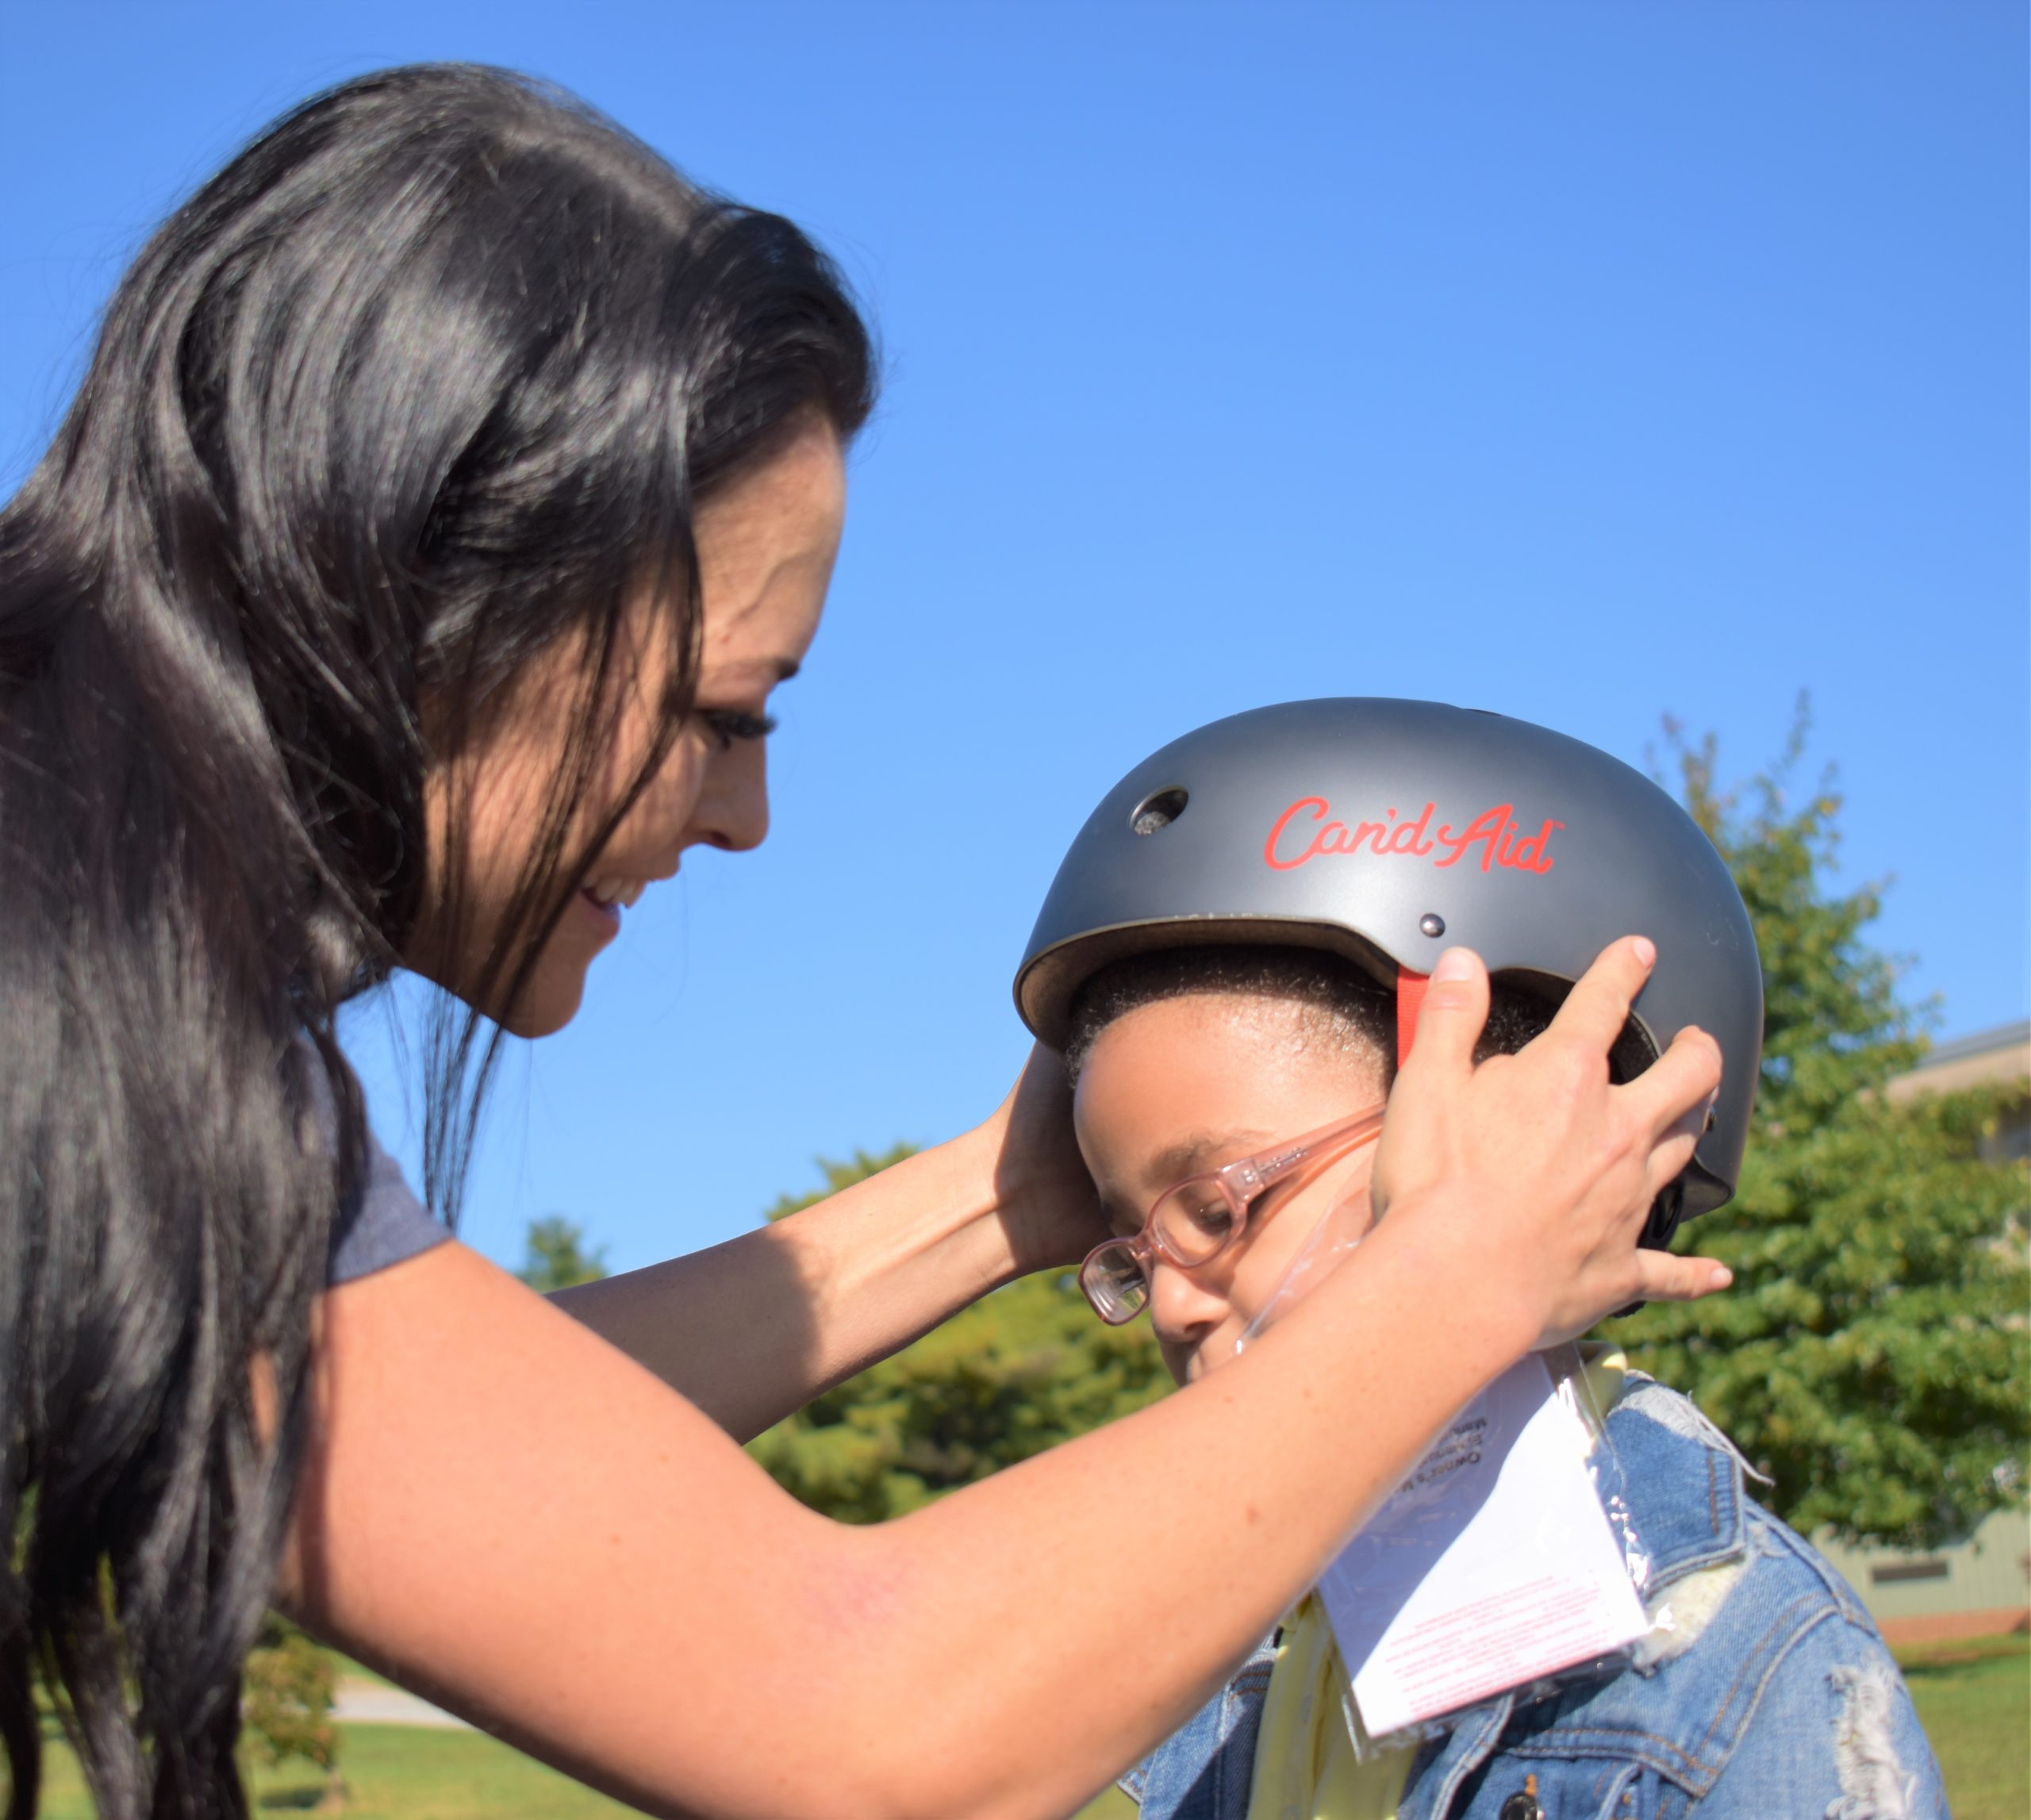 A woman with dark hair places a bike helmet on a child's head. 